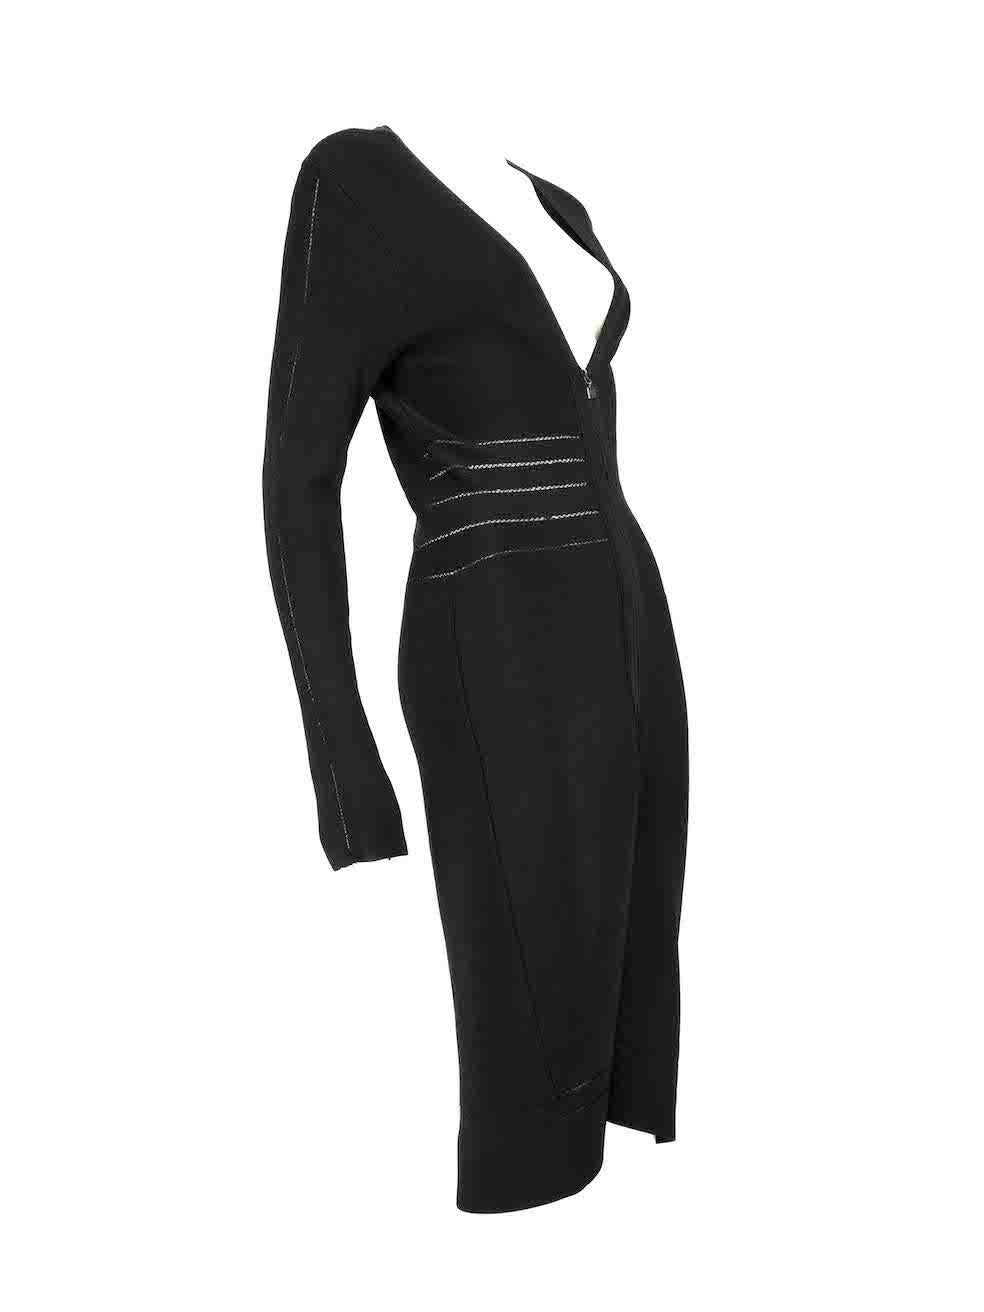 CONDITION is Very good. Hardly any visible wear to the dress is evident. However, due to poor storage, there is light discolouration to the brand label on this used Herve Leger designer resale item.
 
 
 
 Details
 
 
 Black
 
 Synthetic
 
 Dress
 
